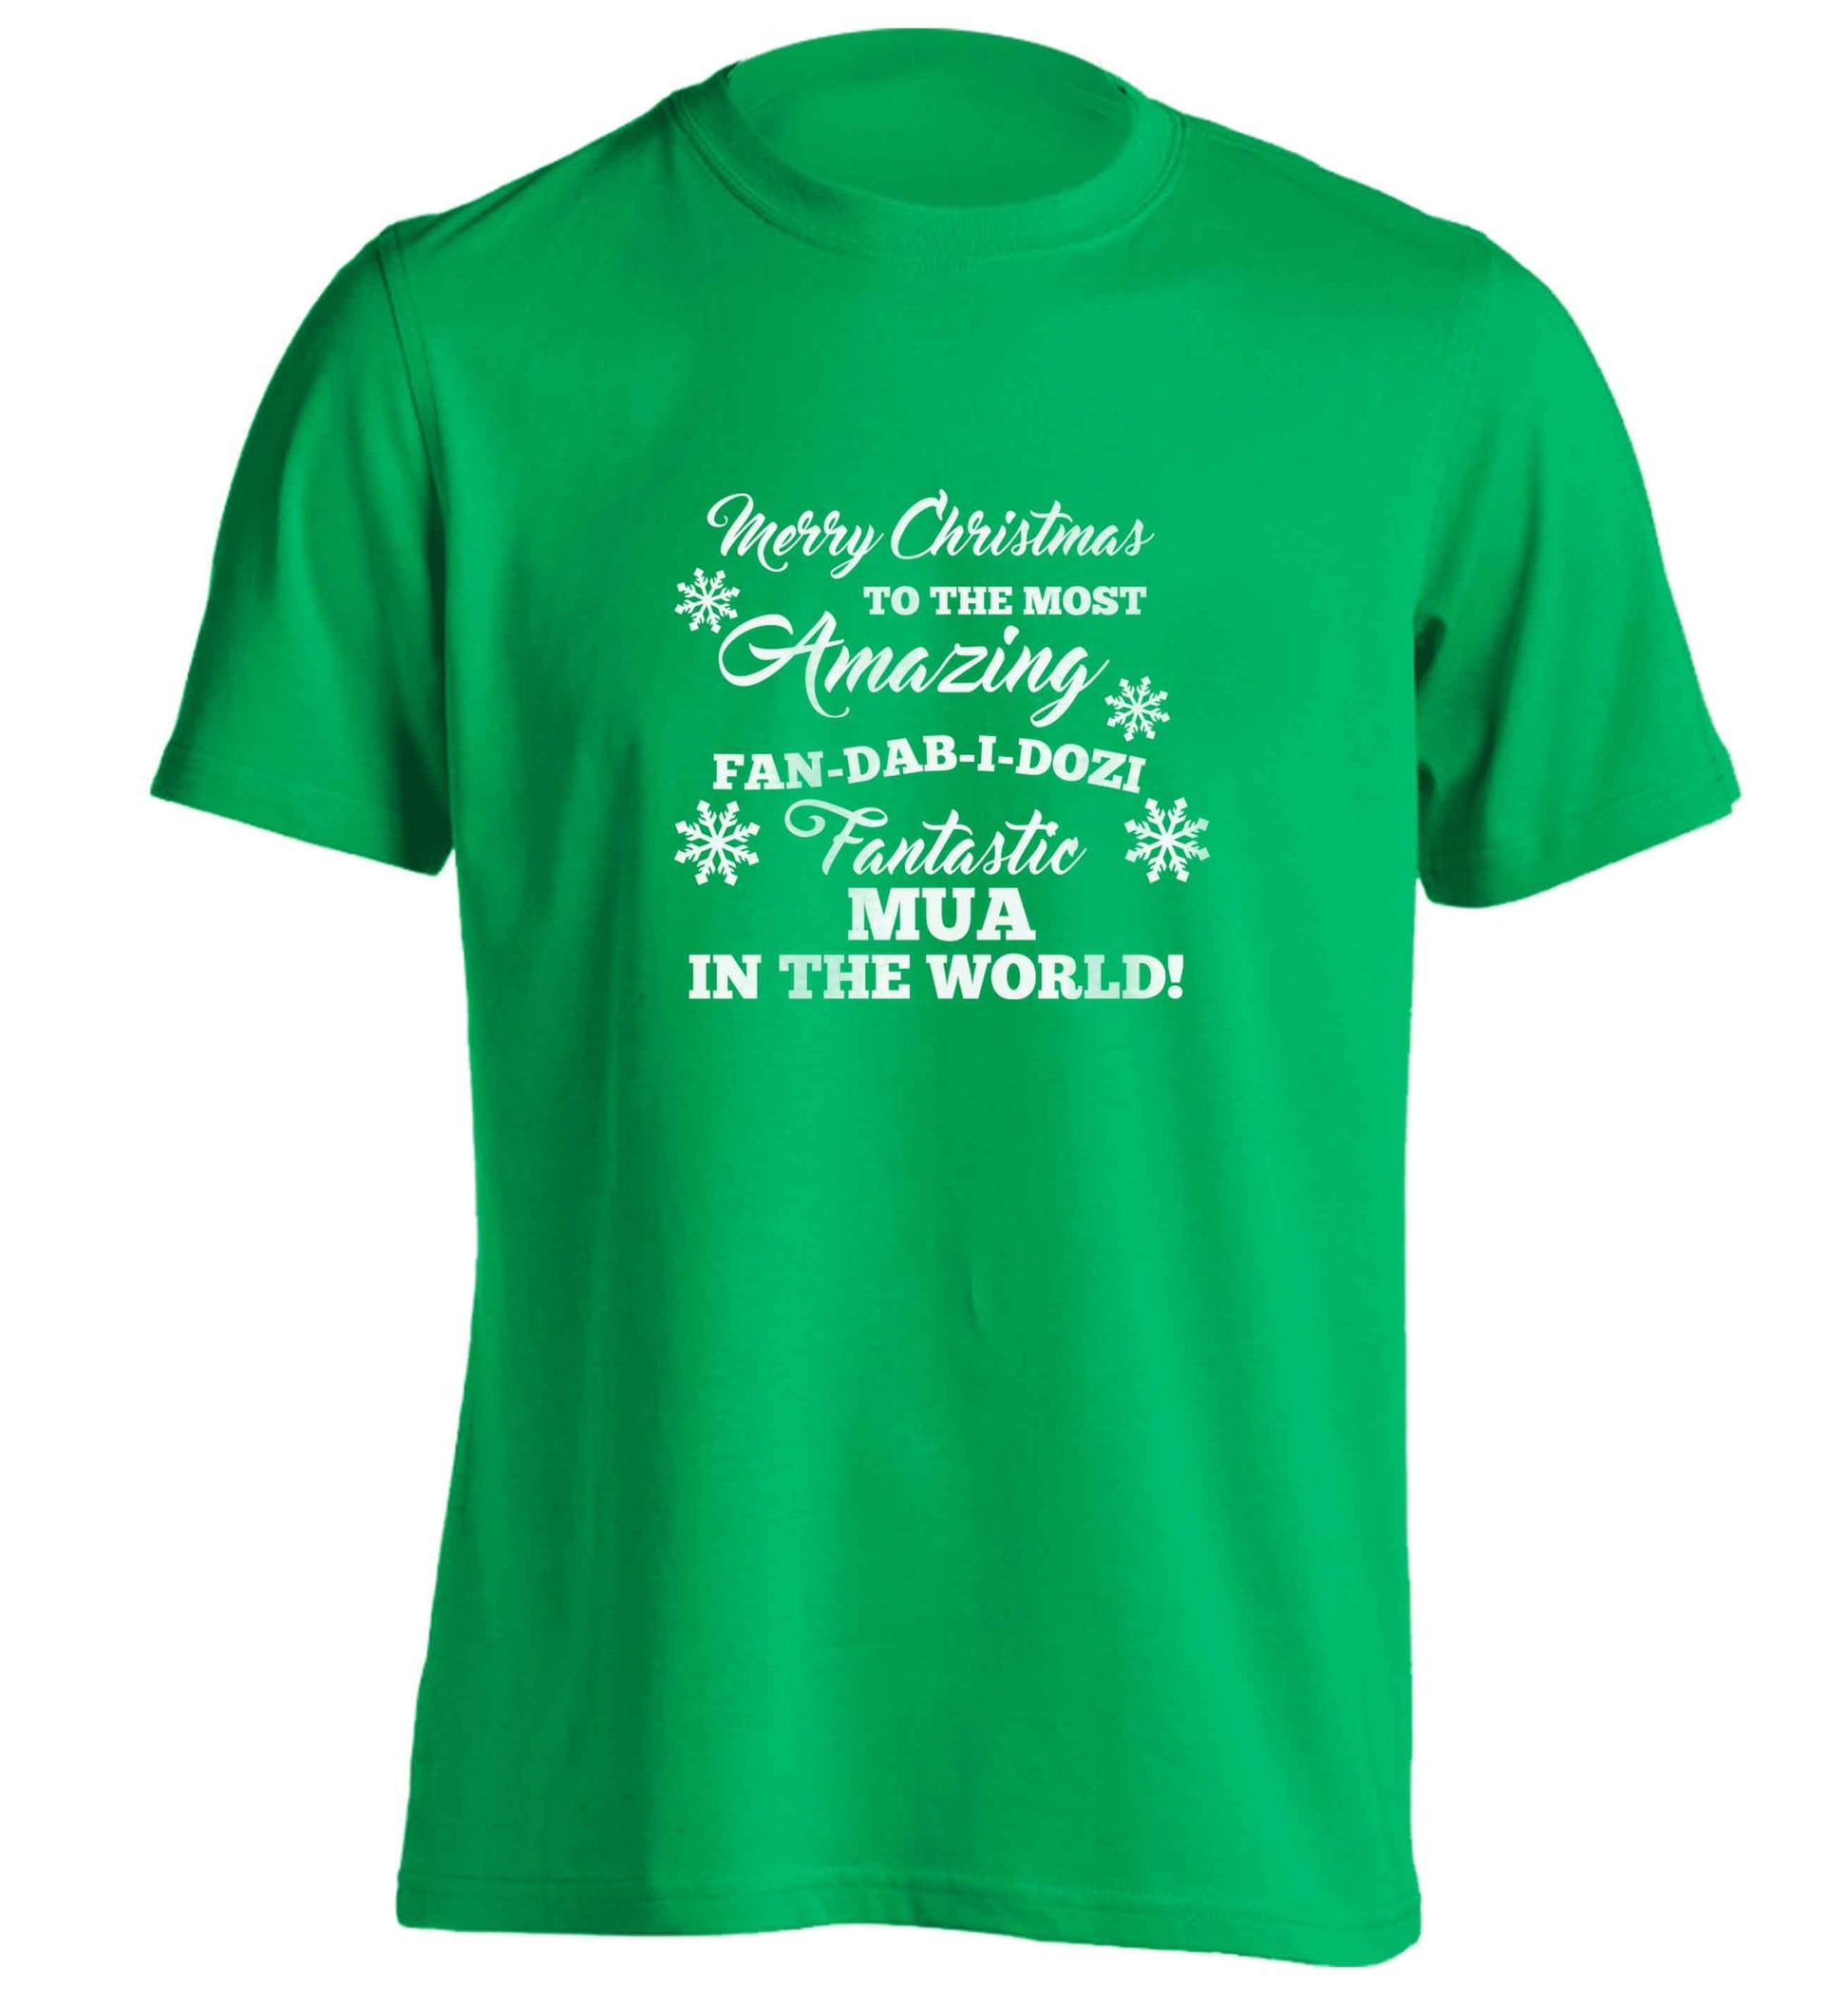 Merry Christmas to the most amazing fan-dab-i-dozi fantasic MUA in the world adults unisex green Tshirt 2XL